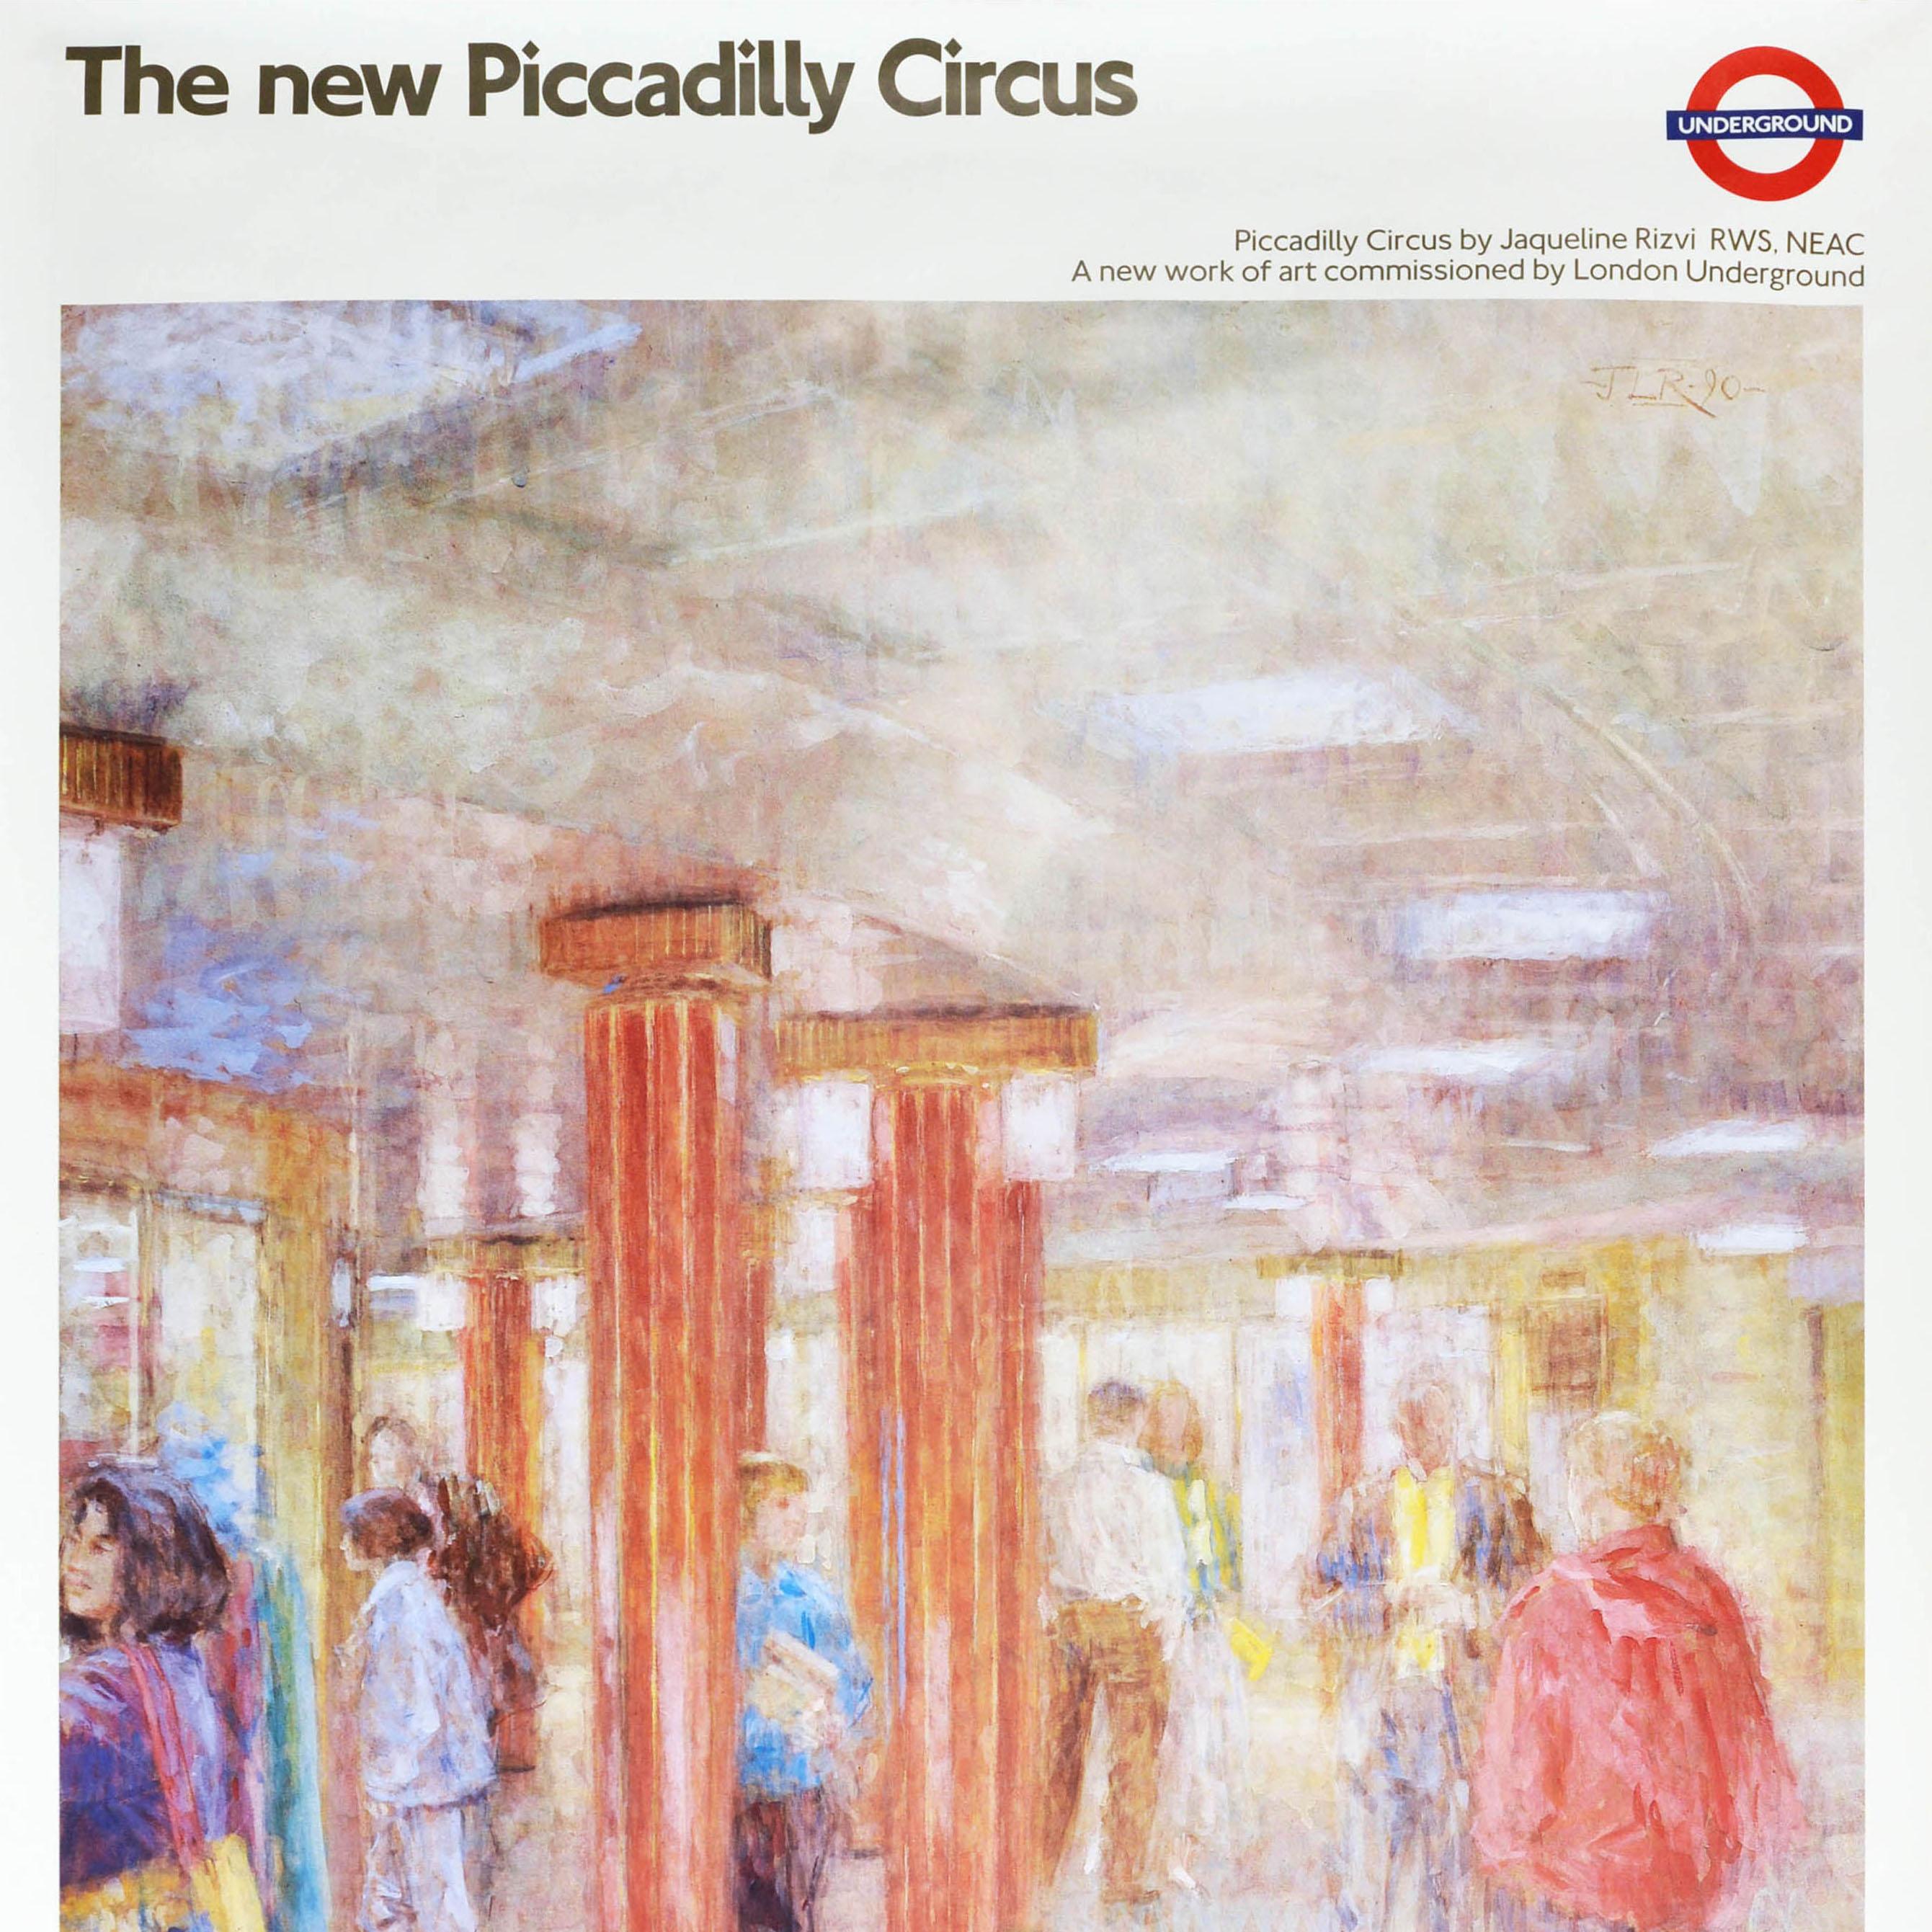 Original Vintage London Underground Poster Piccadilly Circus Tube Design Art - Beige Print by Unknown